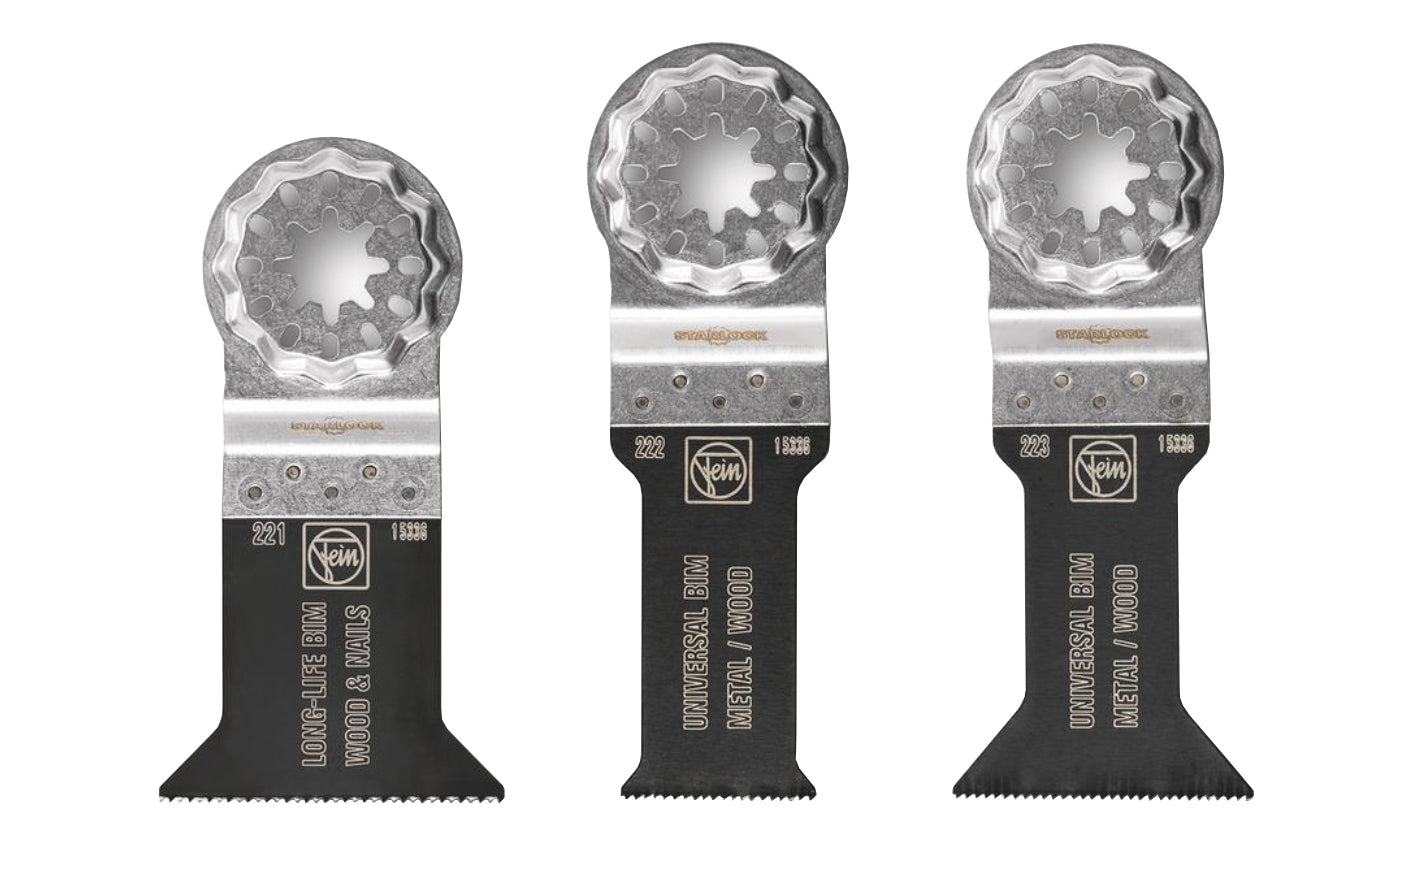 Fein Tools Selection of the 3 most popular Fein E-Cut saw blades for universal use. Bimetal with teeth set for all woods, metal, drywall & plastic materials. Includes: 1-1/8" (28 mm) blade, 1-3/4" (44 mm) blade, 2" (50 mm) blade. Starlock mounting system. Made in Germany. Model 35222952140. 4014586400396. 3 piece set